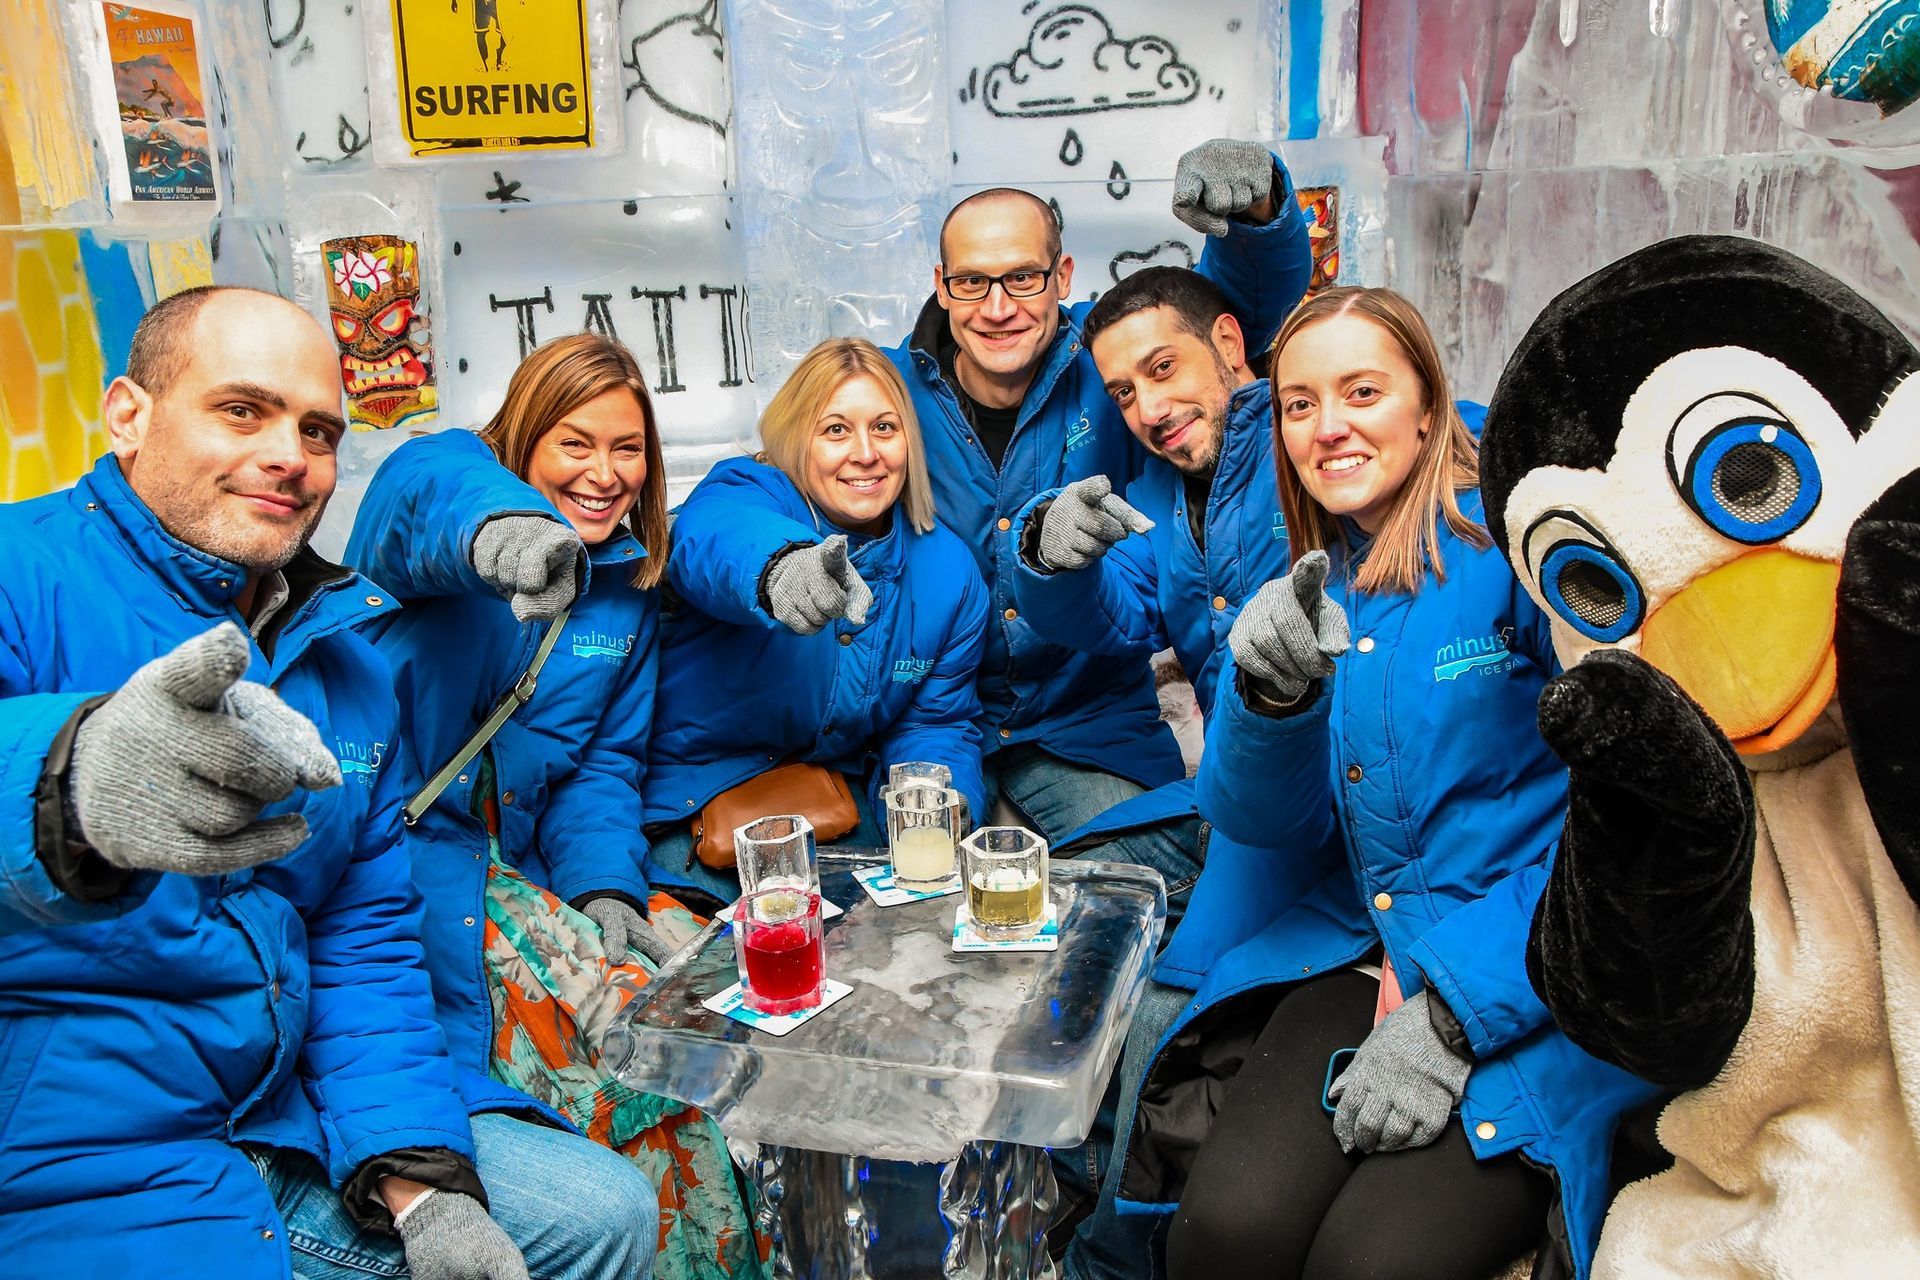 World's Largest Permanent Ice Bar: world record in Las Vegas